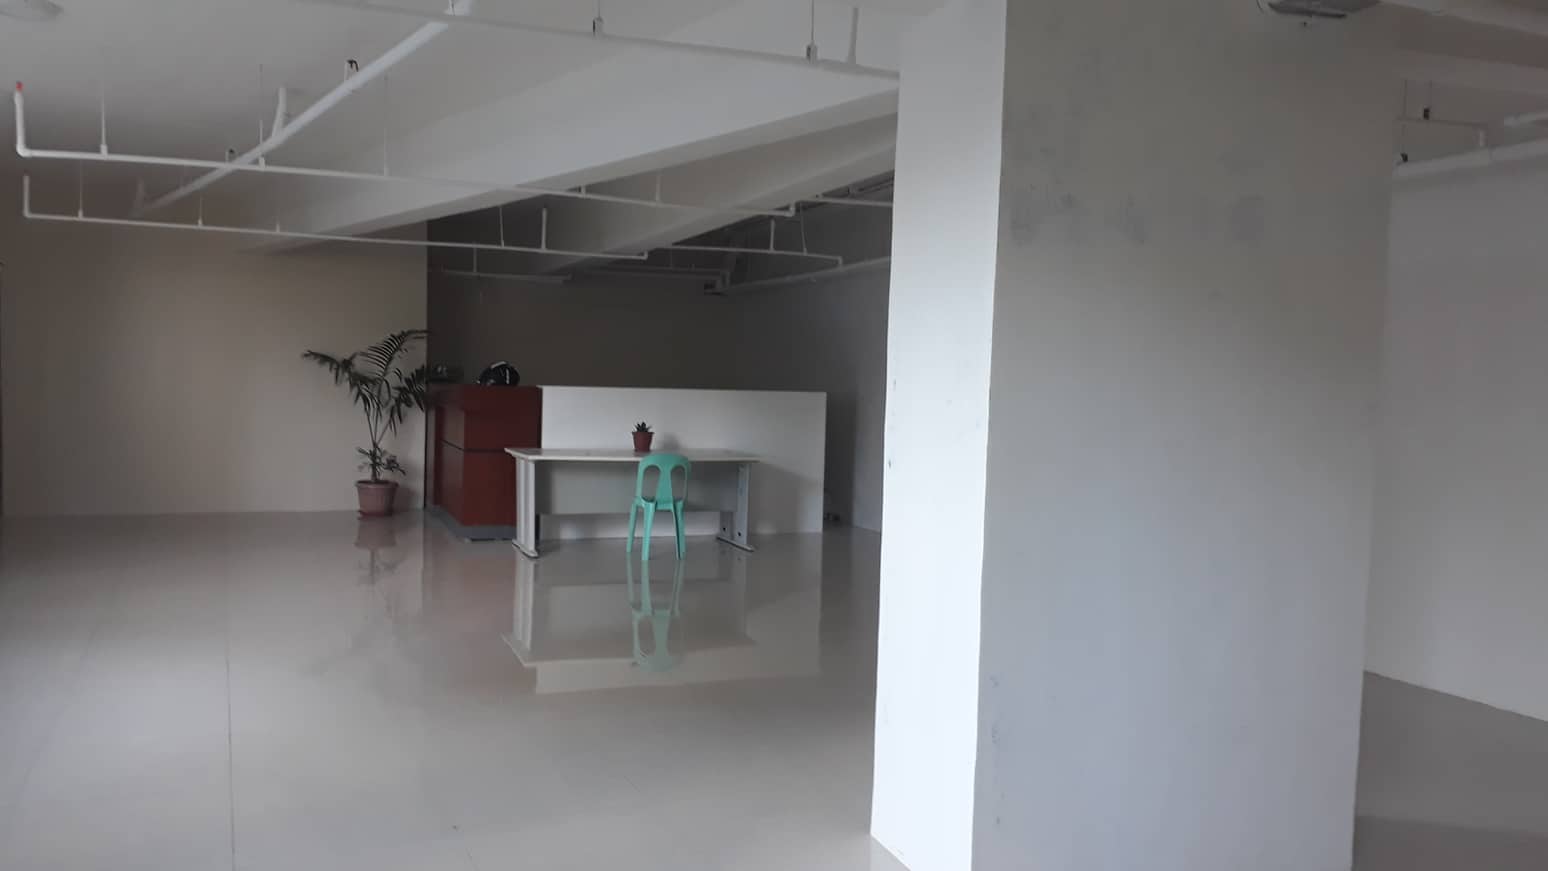 Office space for Lease in MDCT Building, Cebu Business Park, Cebu City